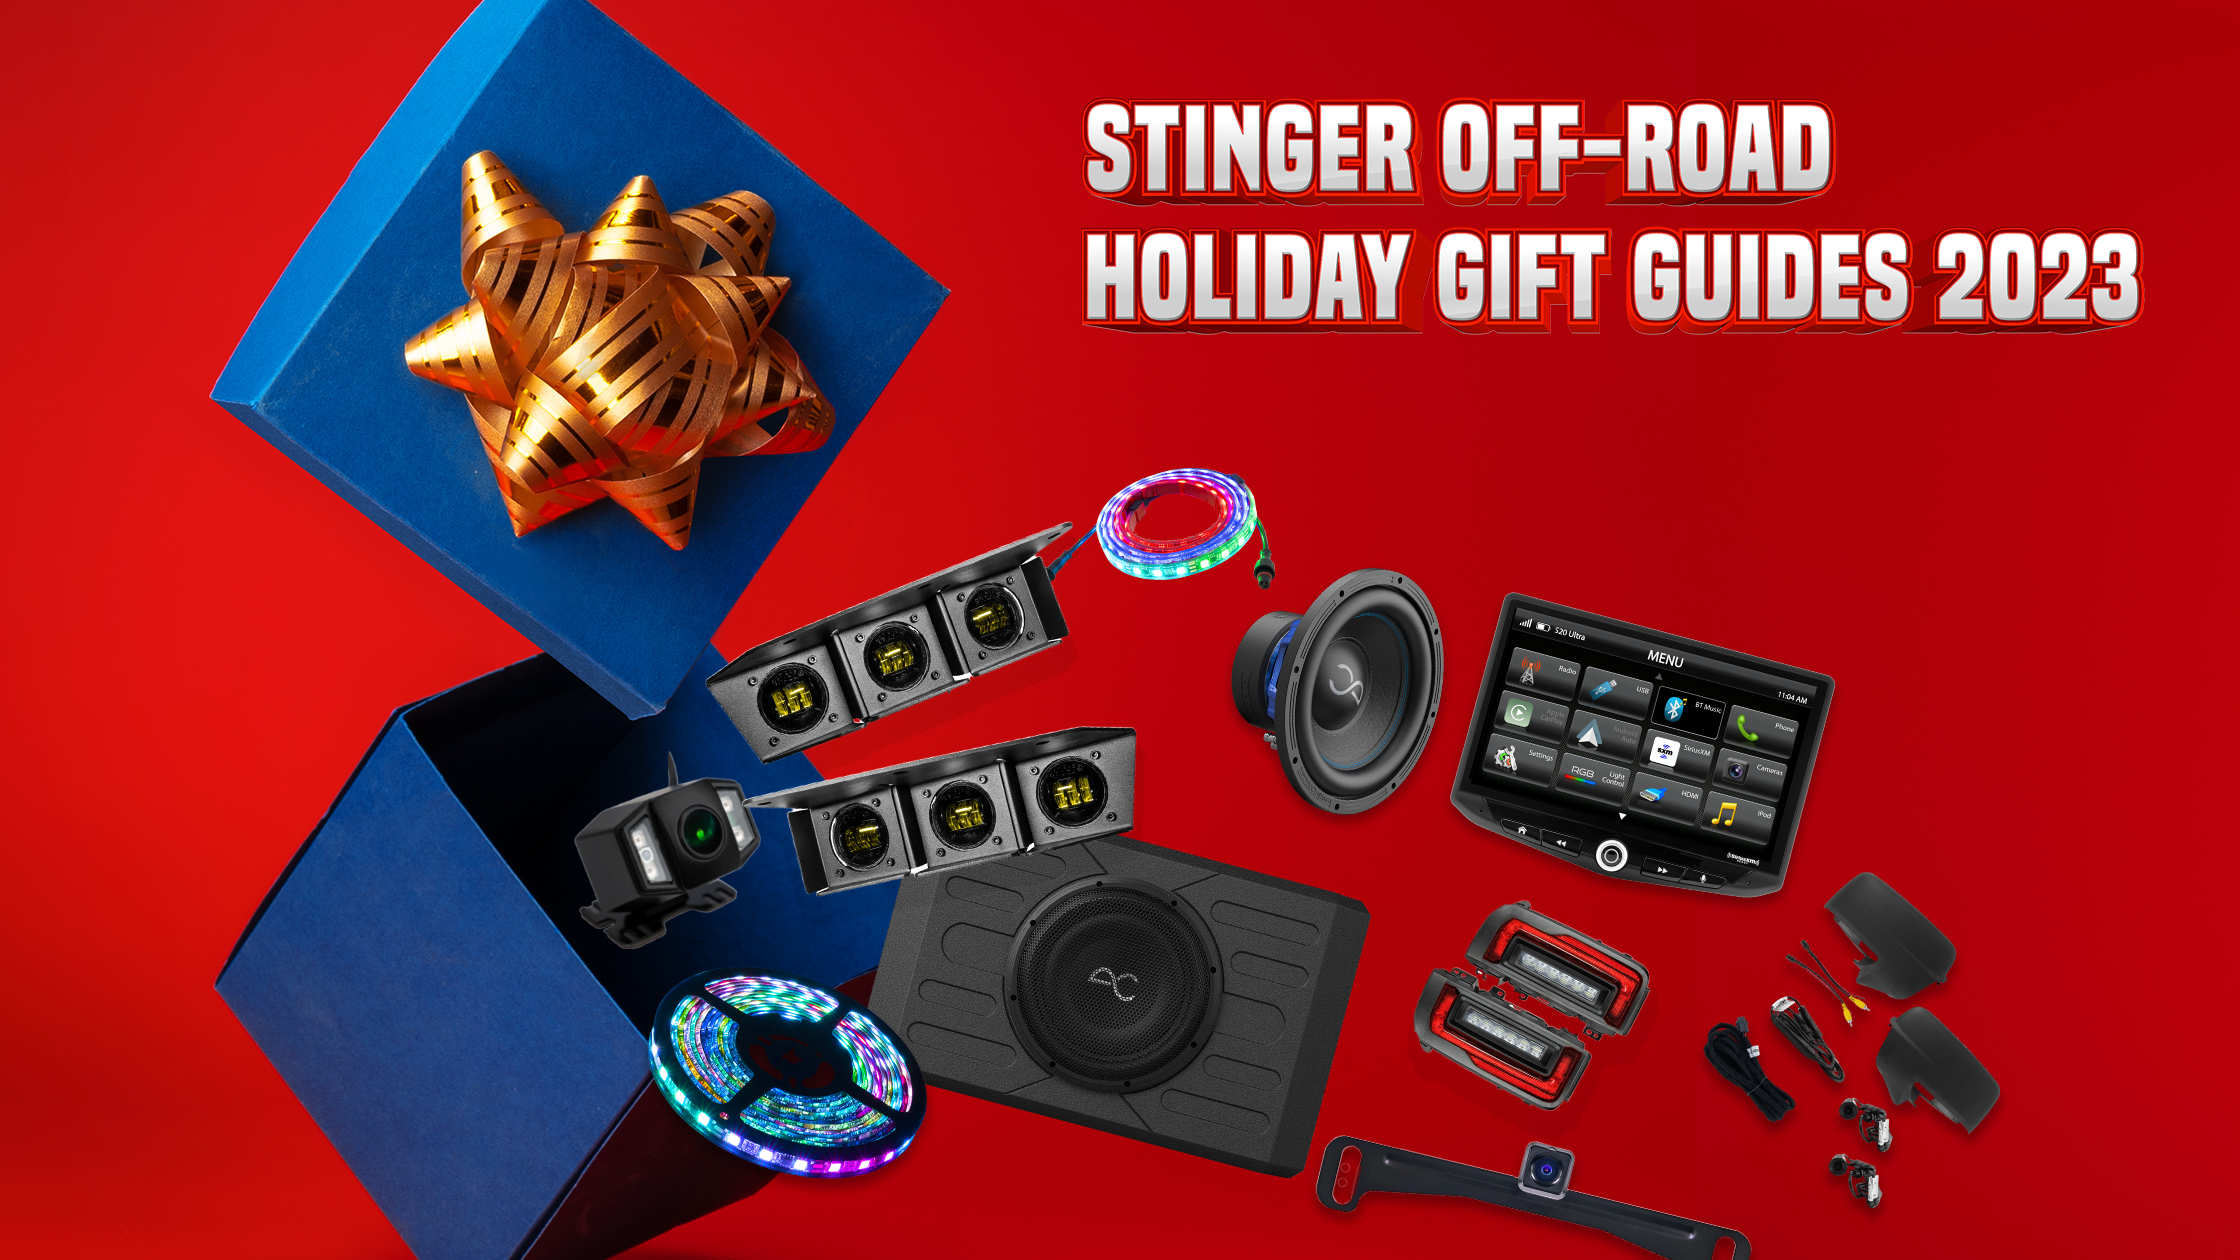 Stinger Off-Road Holiday Gift Guides 2023